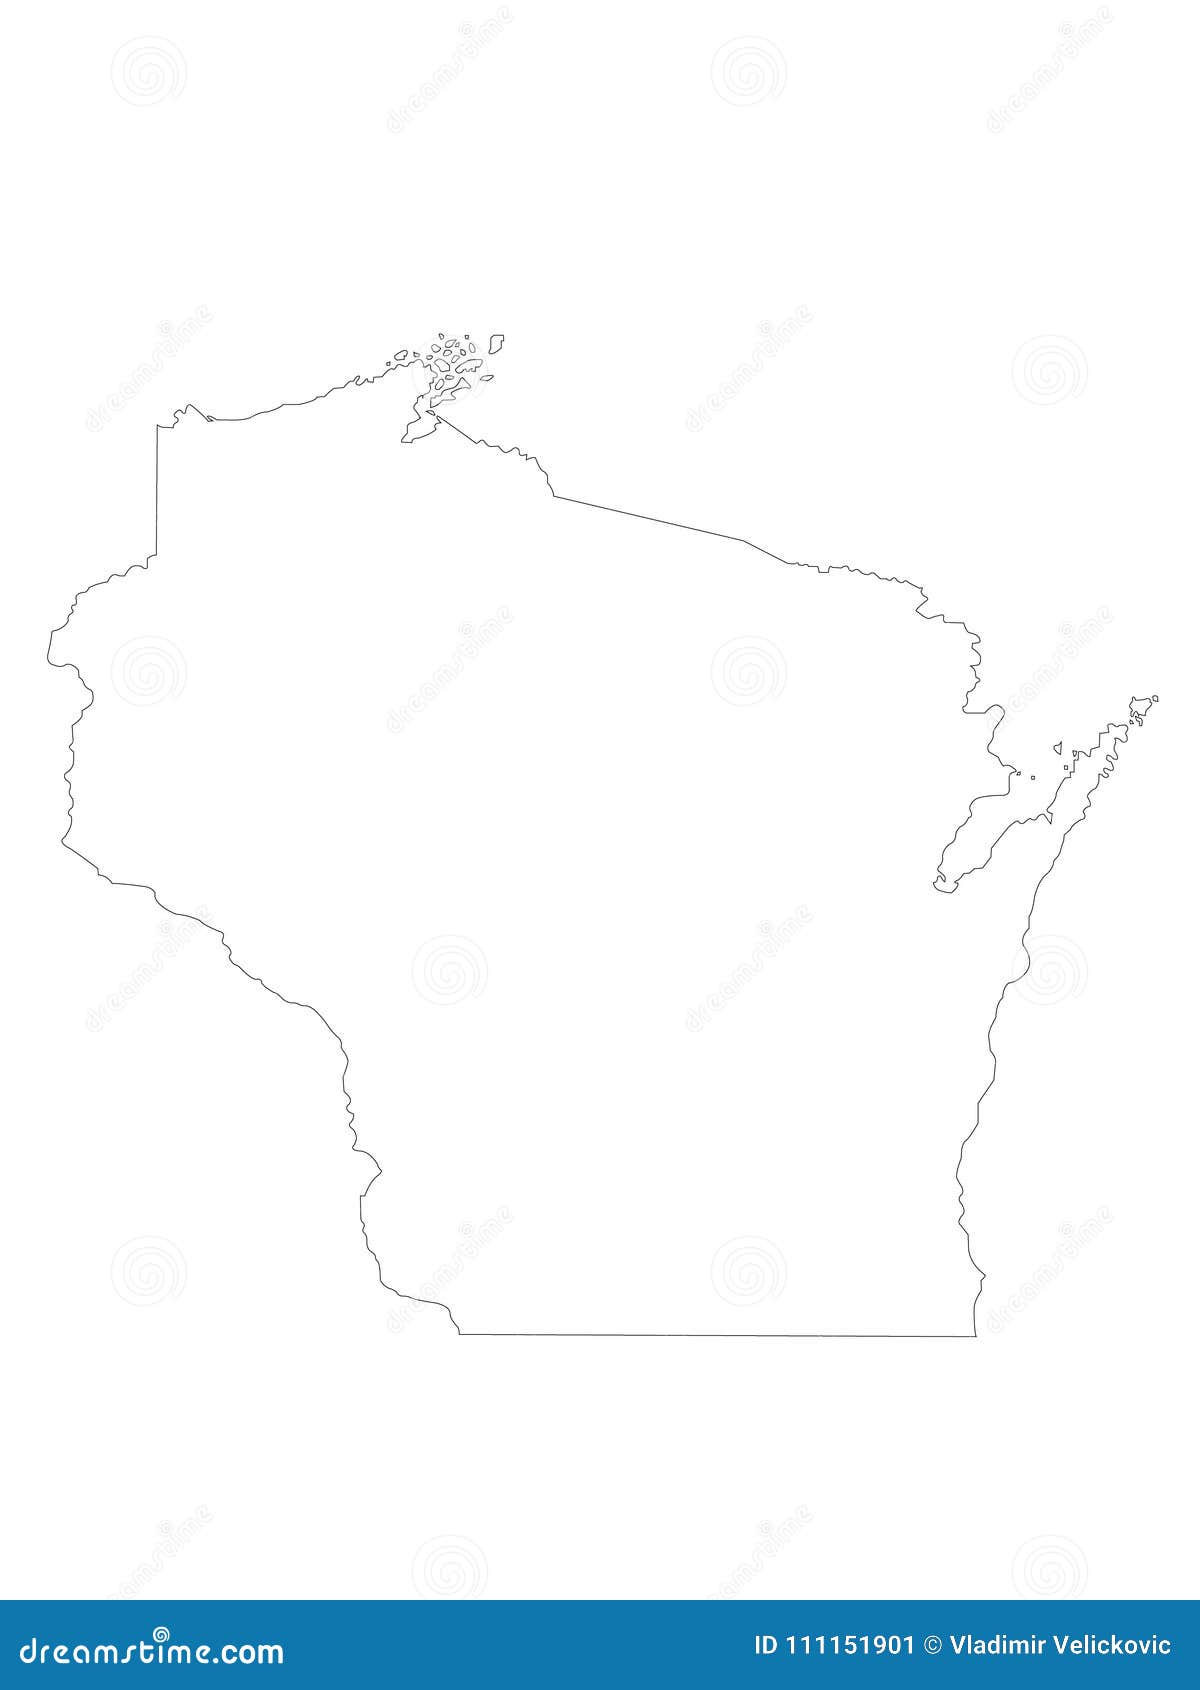 Wisconsin Map State In The North Central United States Stock Vector